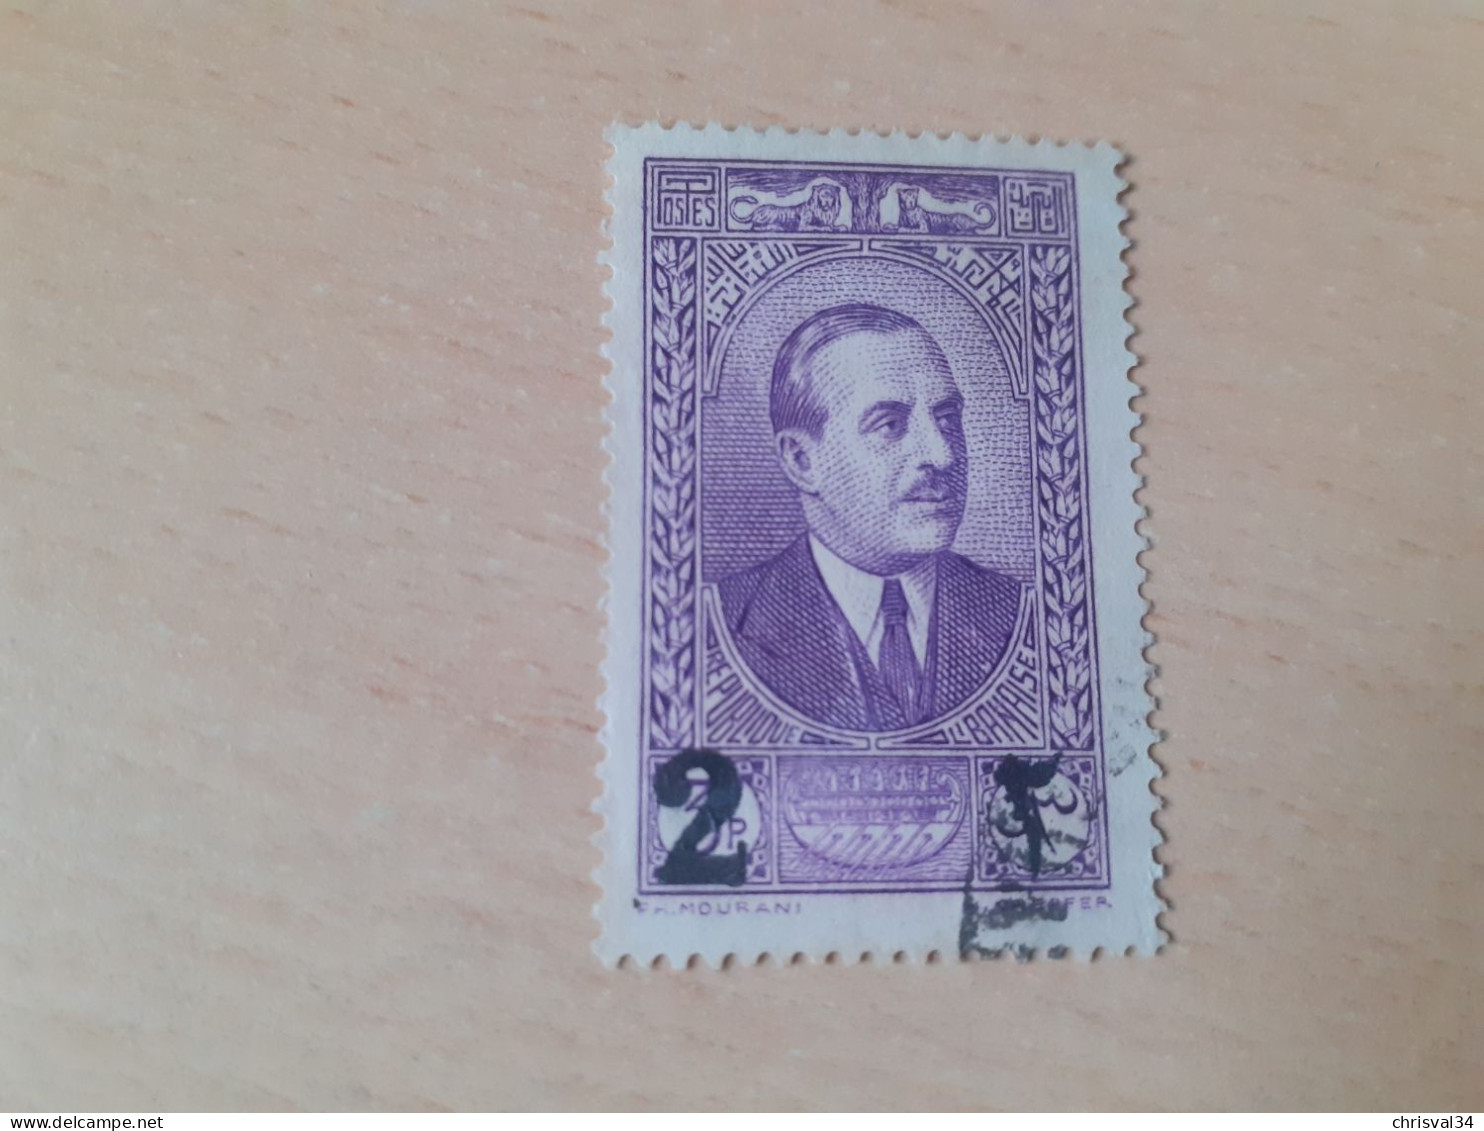 TIMBRE   GRAND  LIBAN       N  157      COTE  1,50  EUROS    OBLITERE - Used Stamps